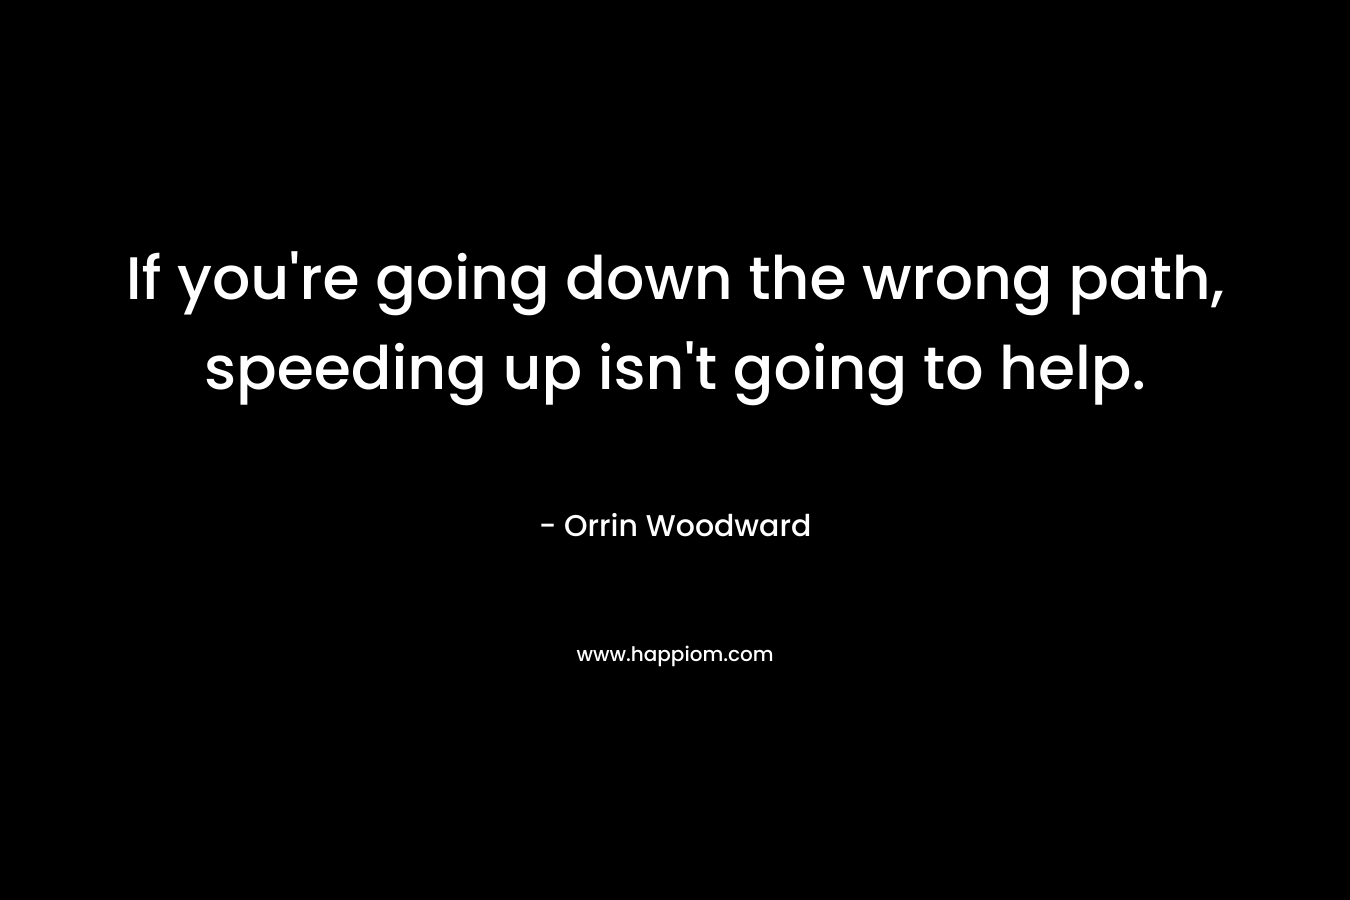 If you’re going down the wrong path, speeding up isn’t going to help. – Orrin Woodward